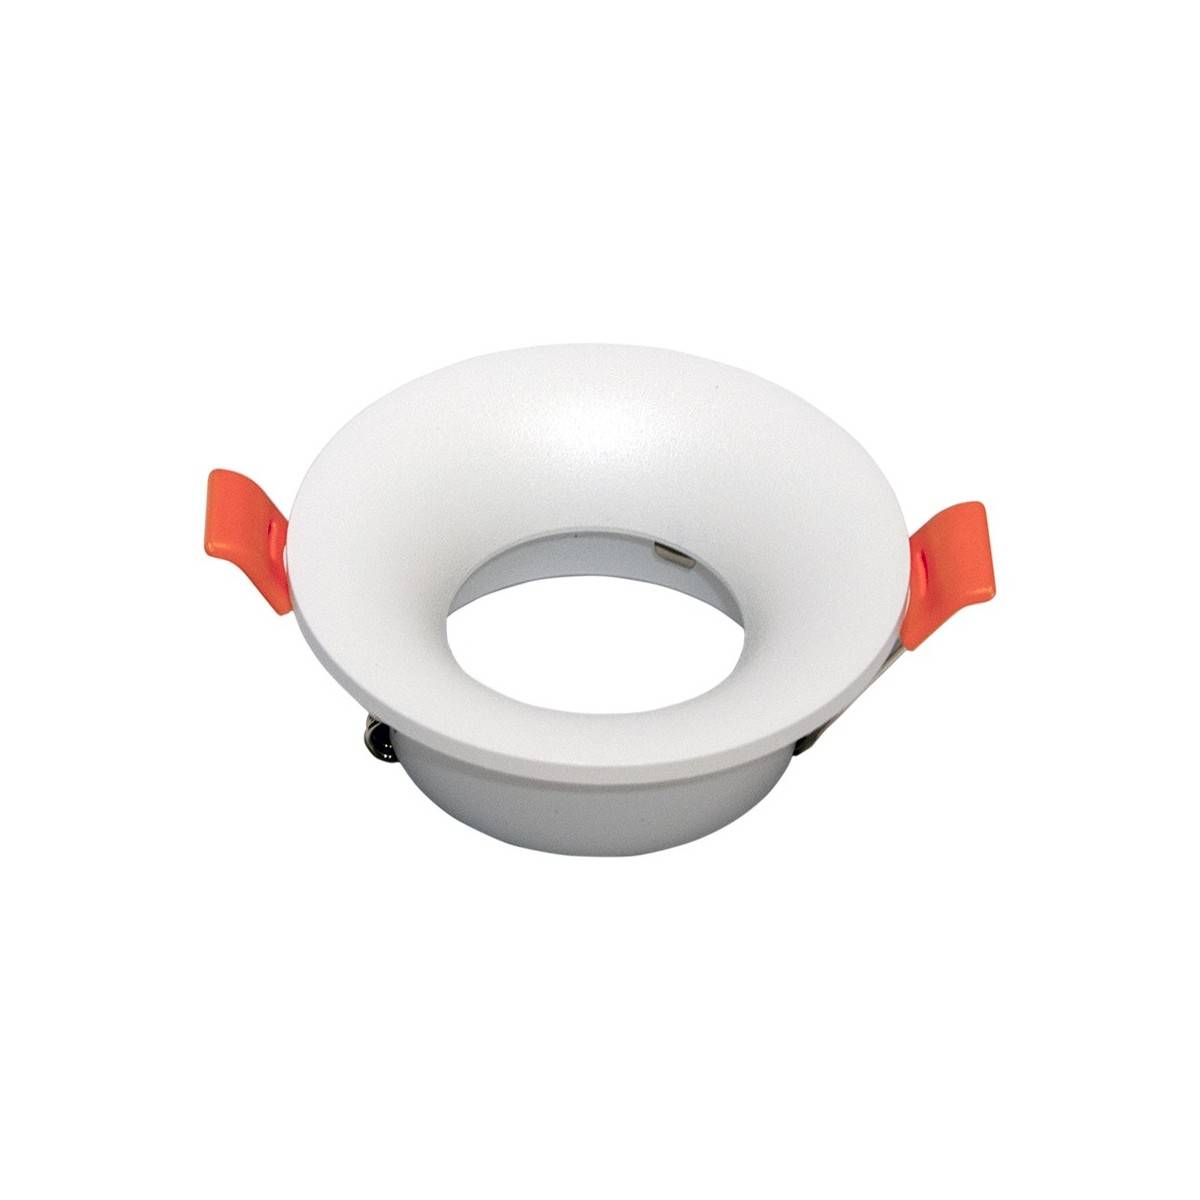 Recessed ring for GU10 round bulb